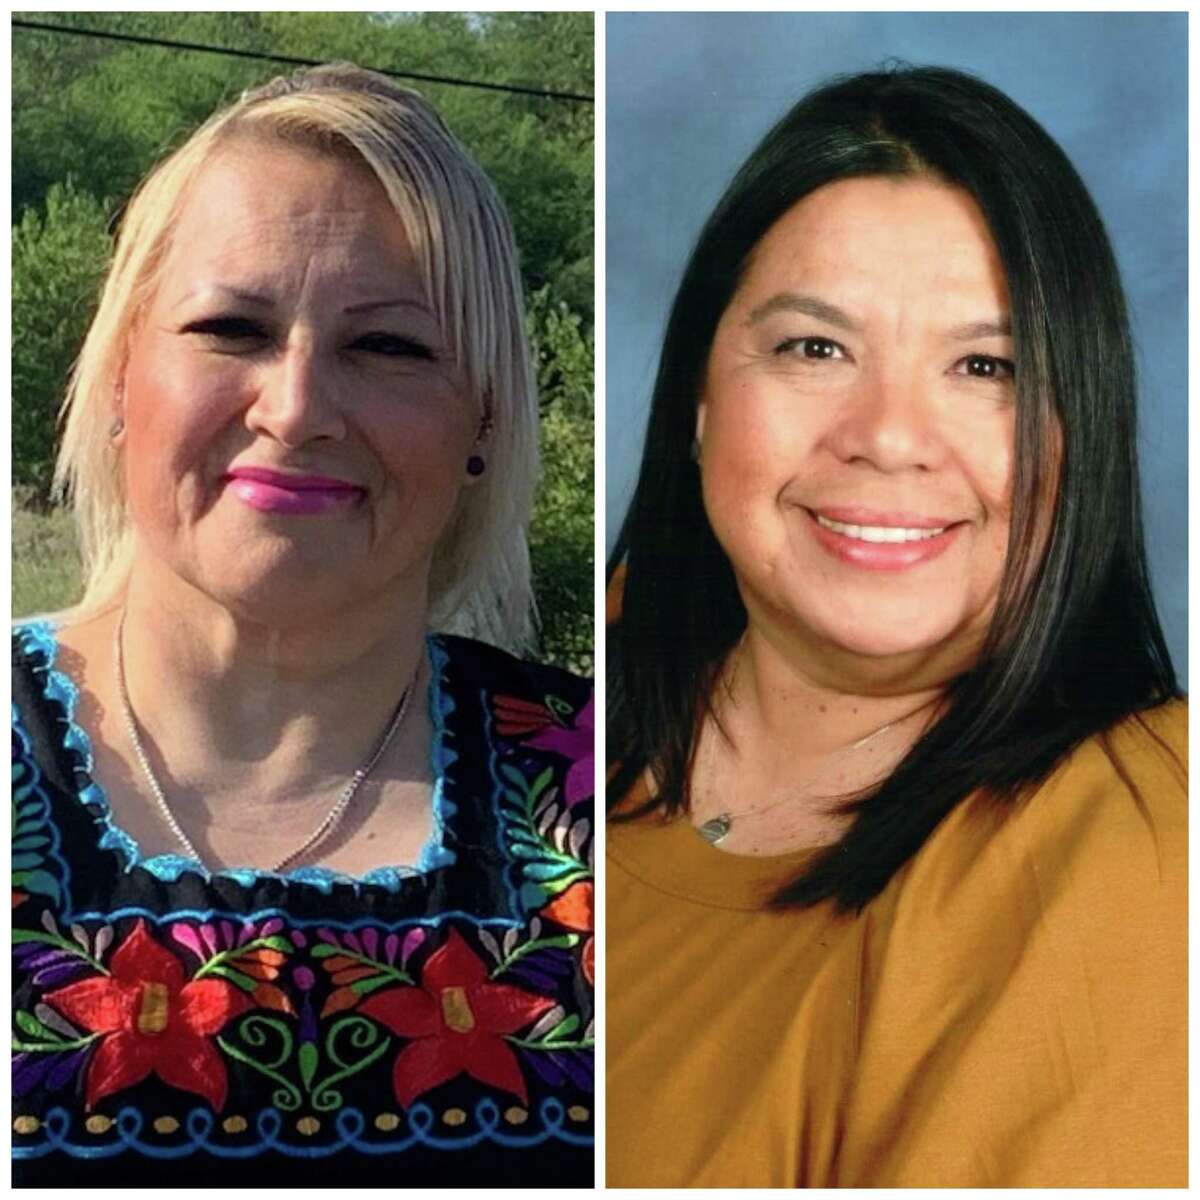 Gina Villagomez won a South San ISD board seat by defeating Veronica Barba, who was appointed as a trustee last year.